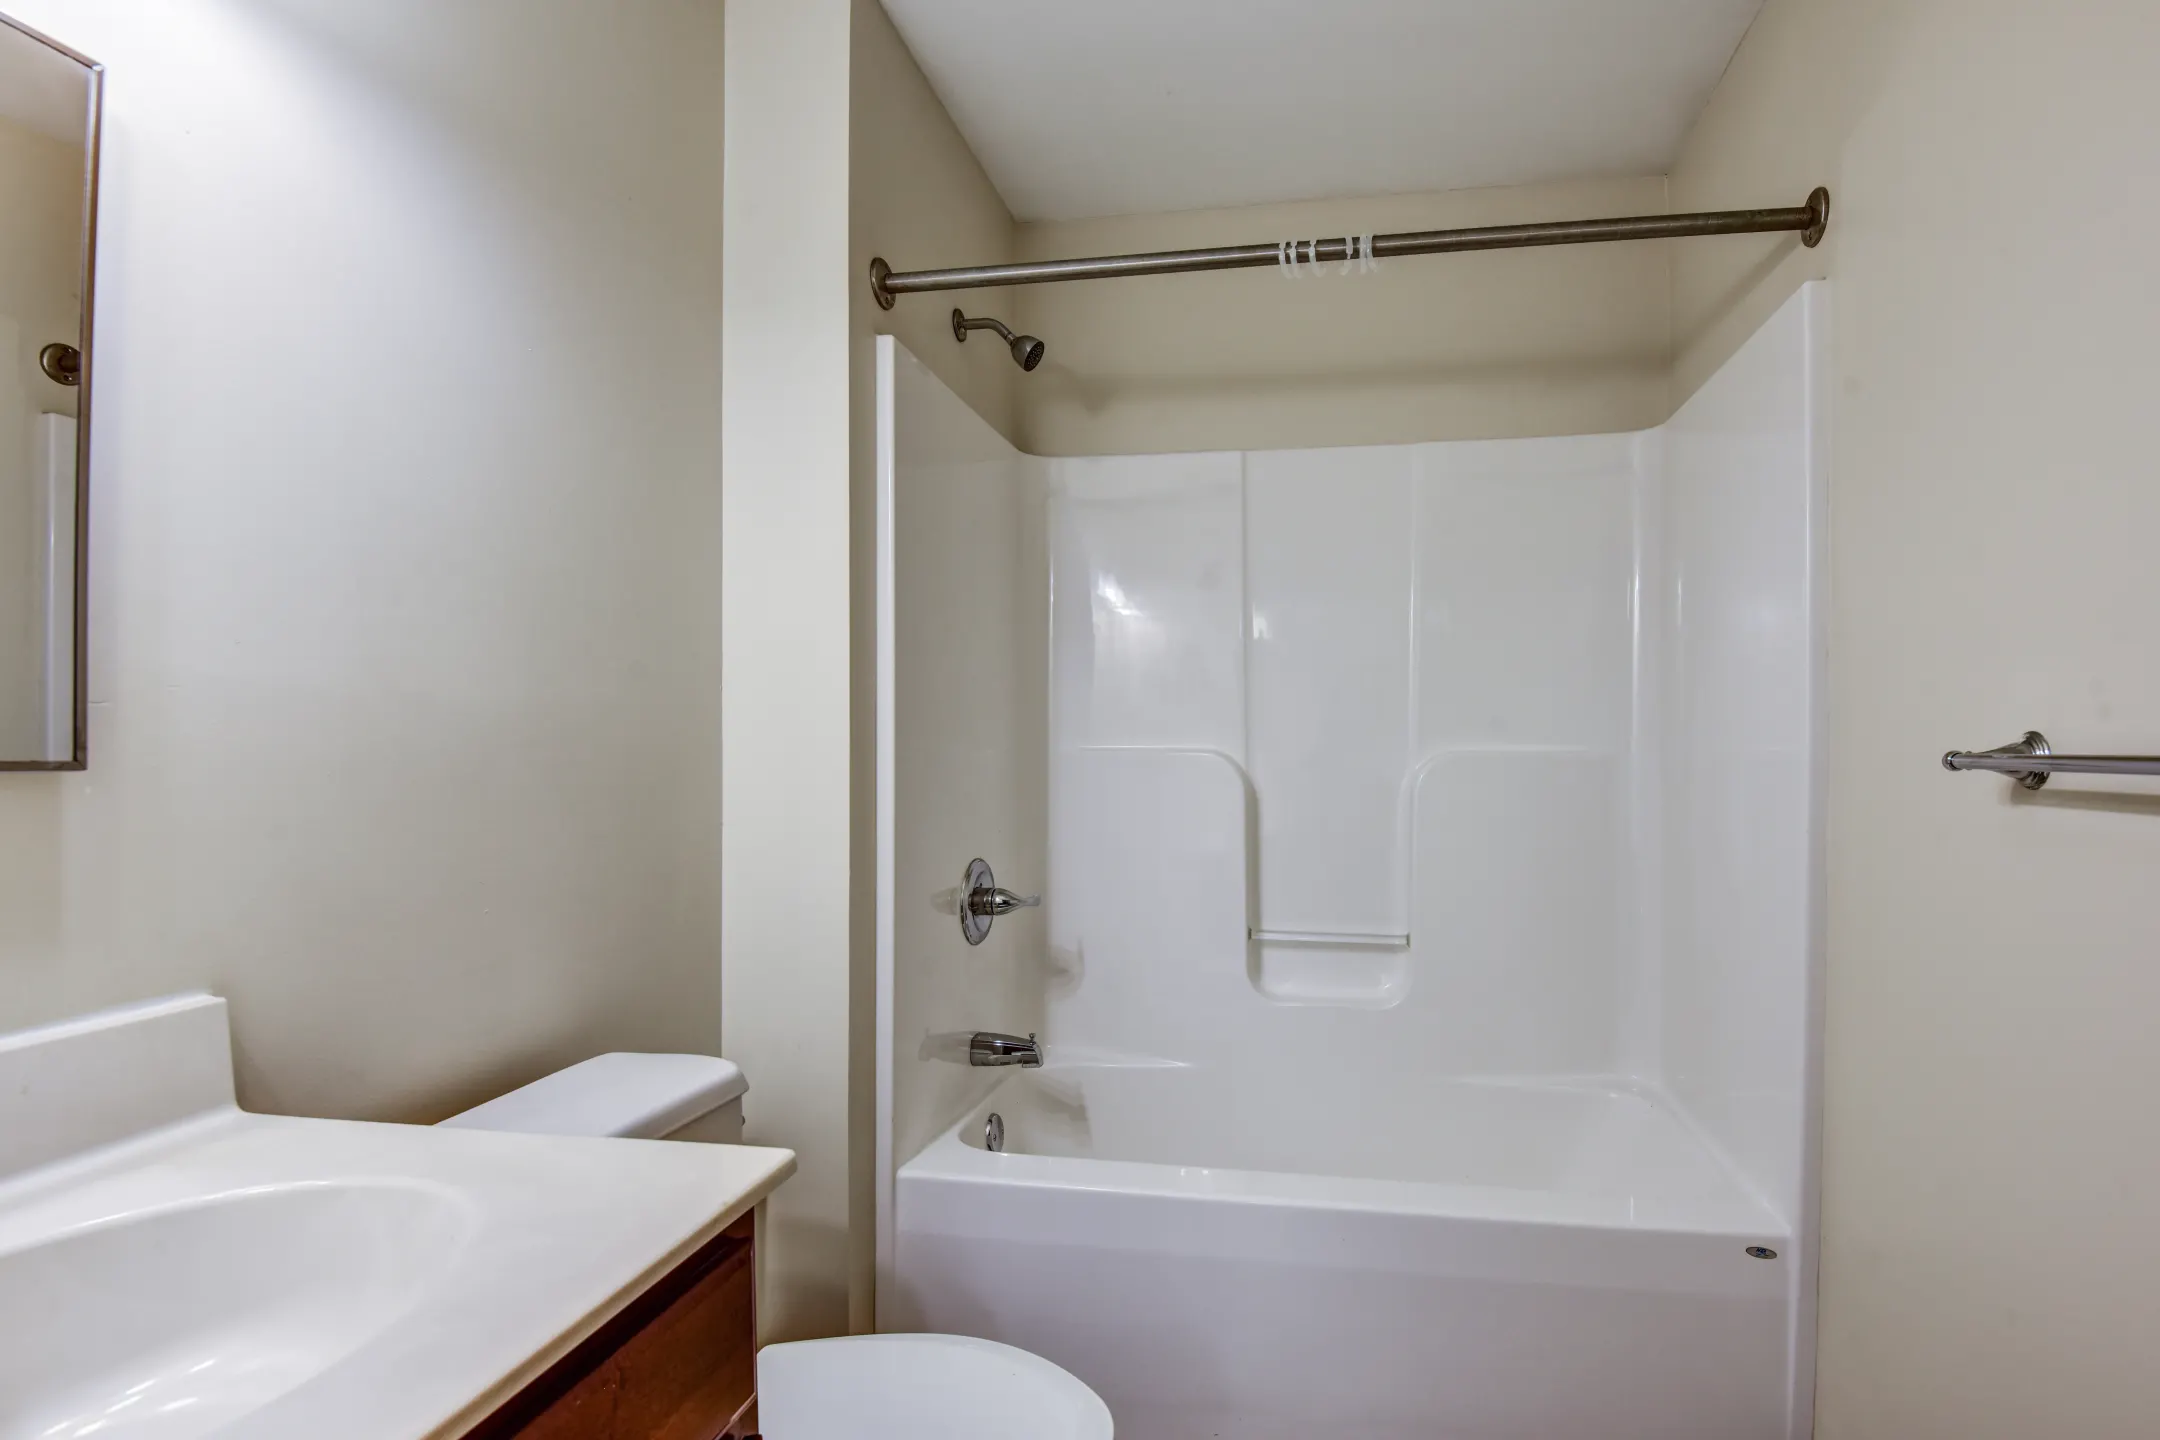 Bathroom - The Apartments at Ames Privilege - Chicopee, MA